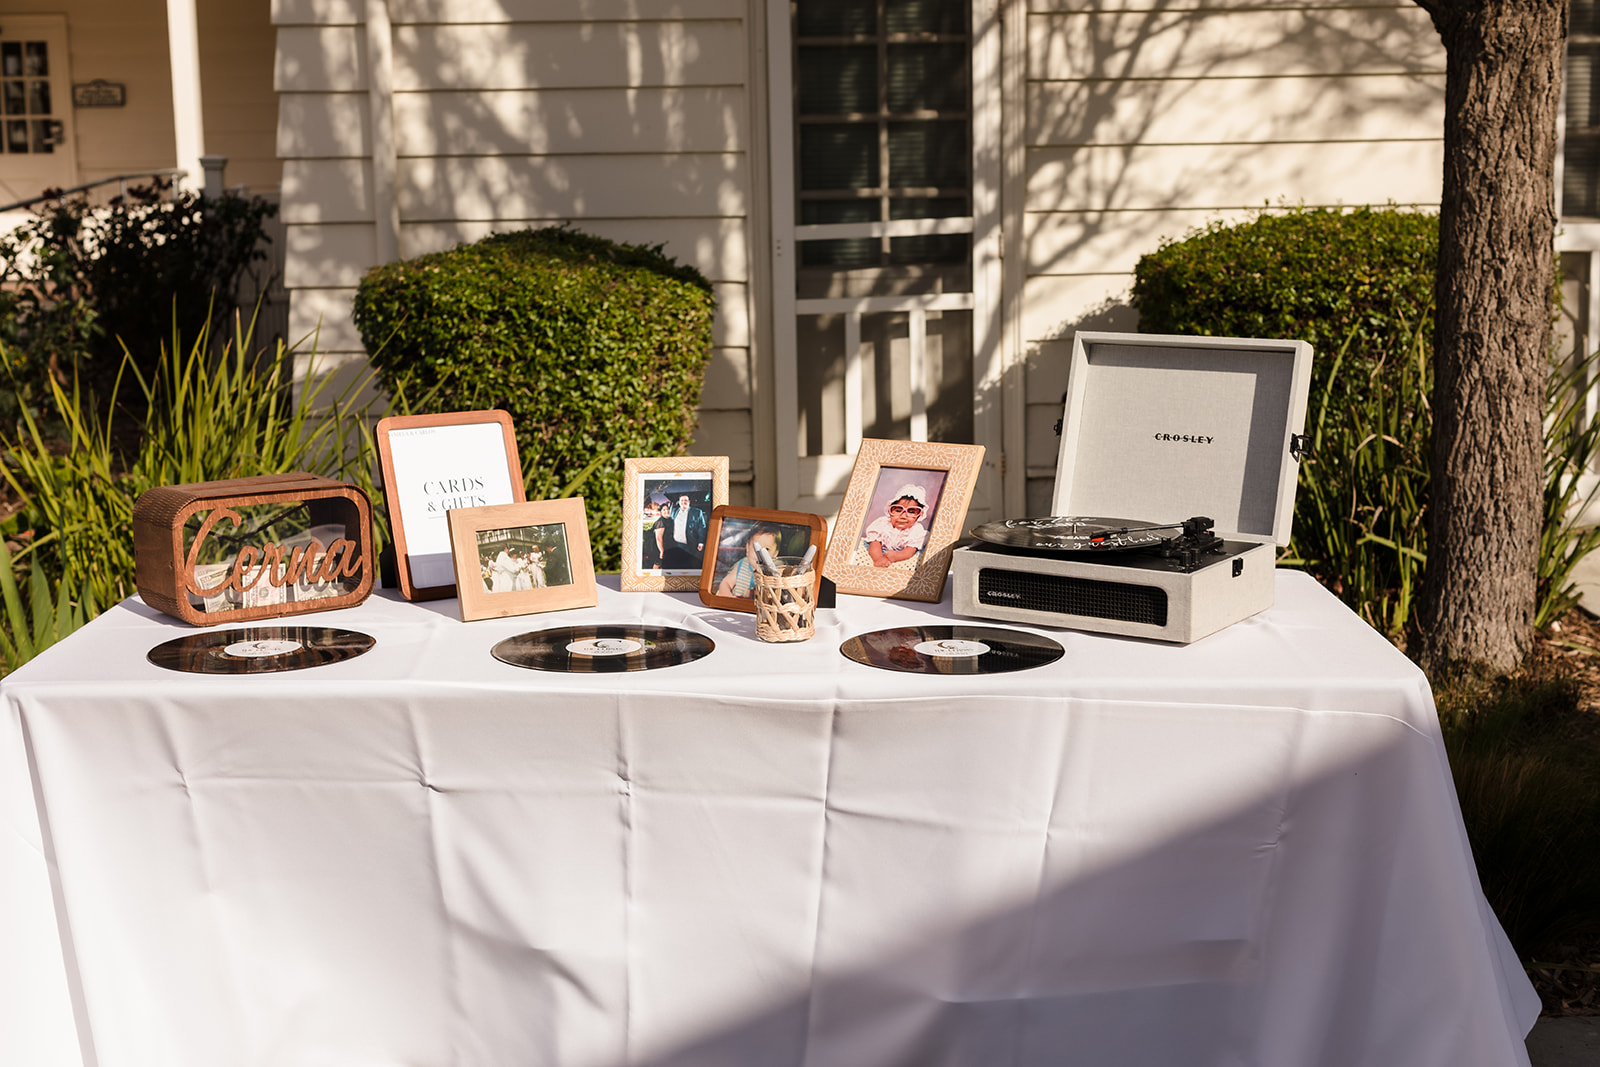 Guest sign-in table with records for wedding guests to sign